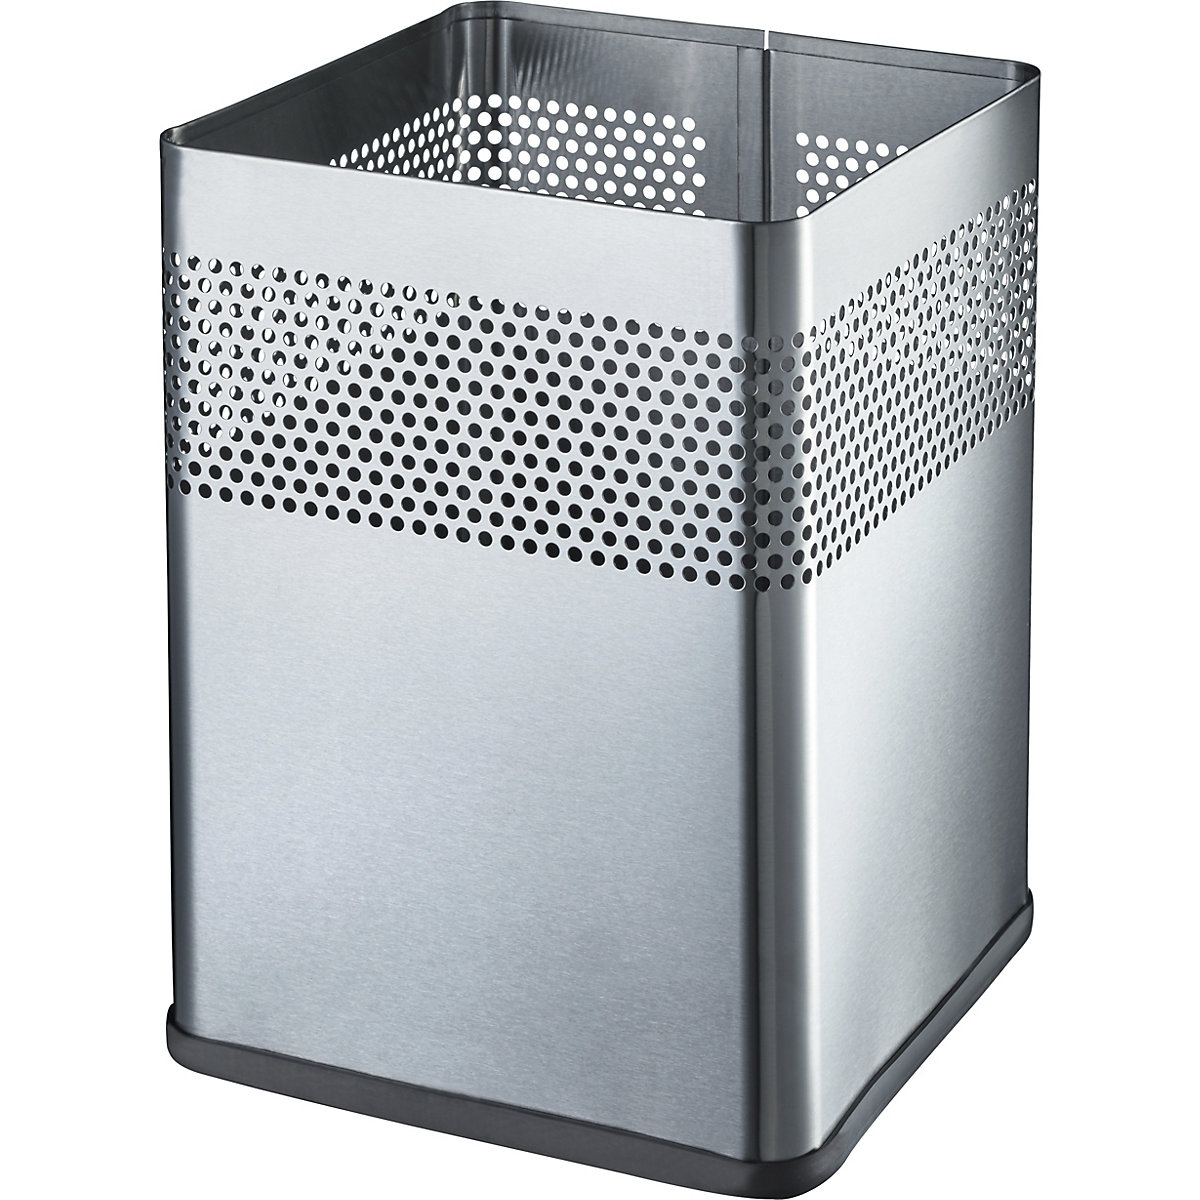 Waste paper bin, square – helit, capacity 18 l, WxHxD 240 x 325 x 240 mm, stainless steel, pack of 2-1